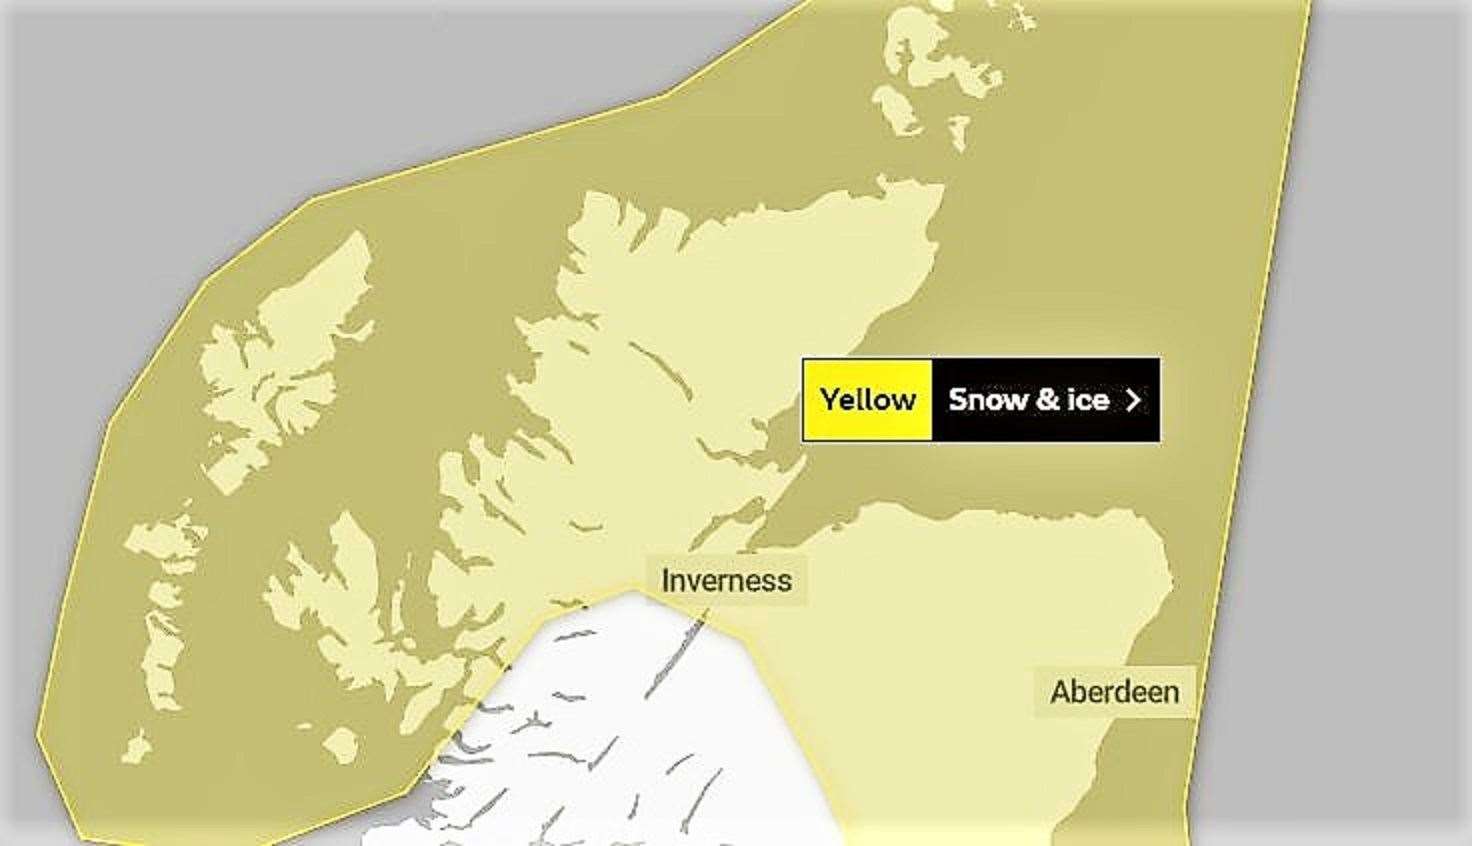 Met Office map shows warning of snow and ice in the far north over the next couple of days.